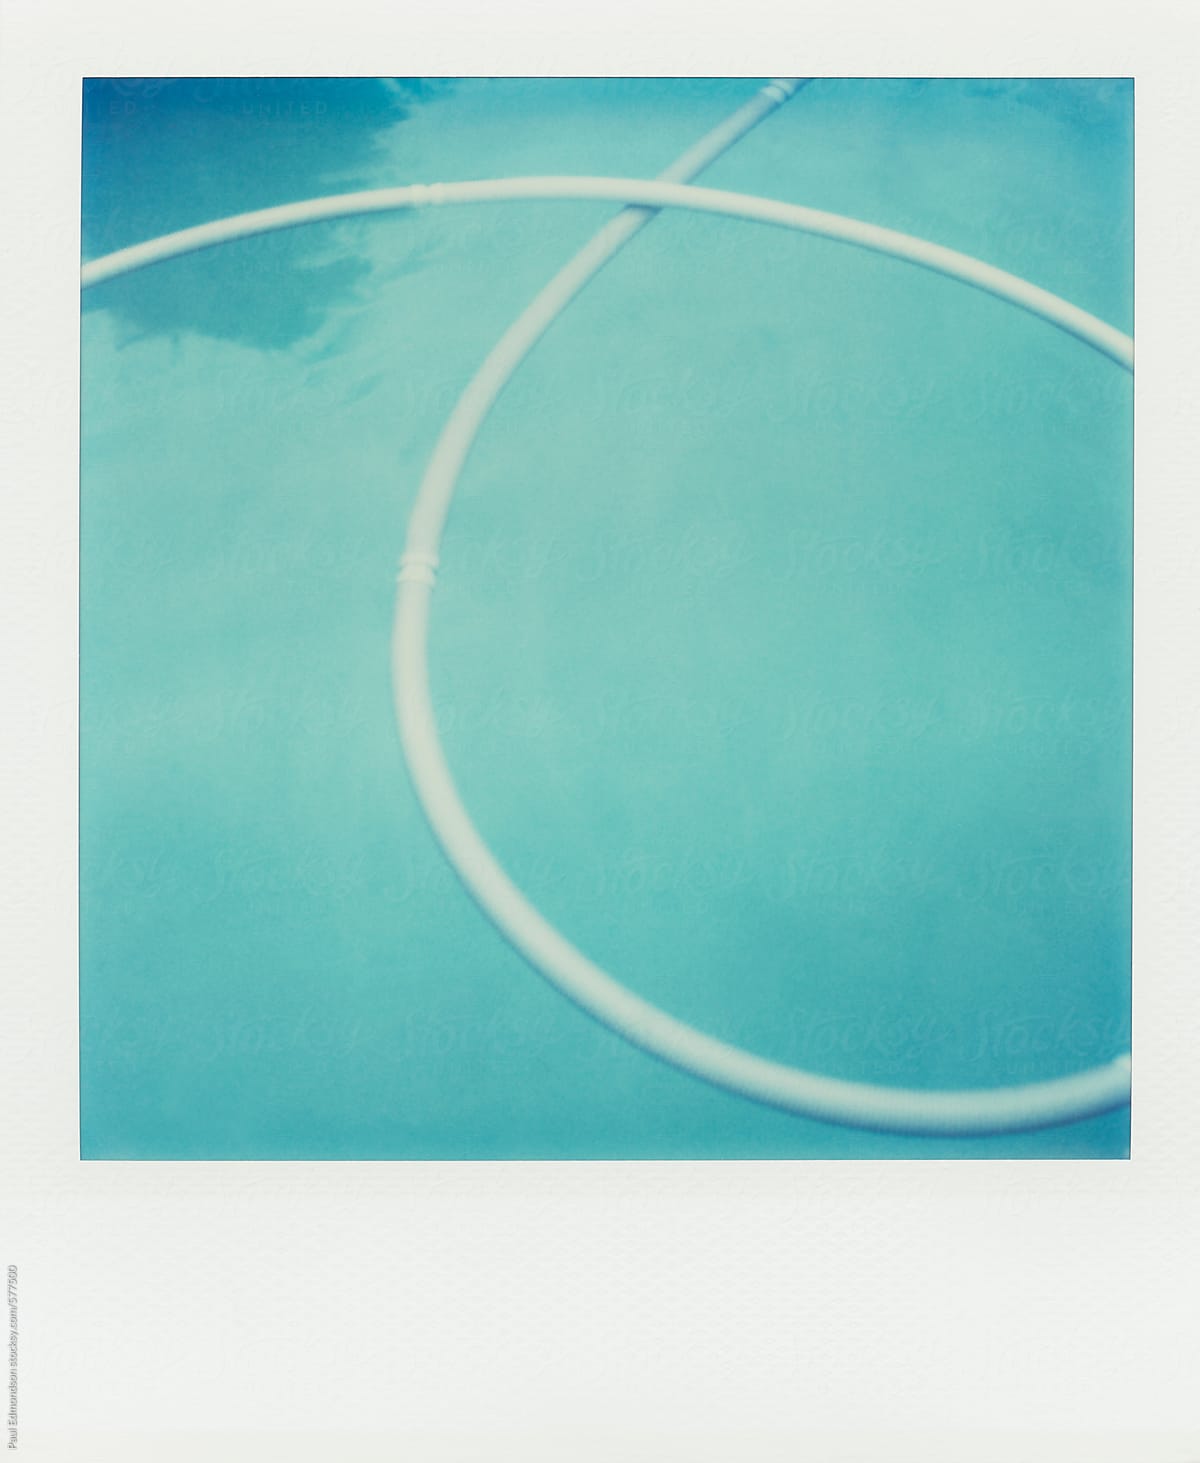 Plastic tubing floating on surface of swimming pool water (Polaroid SX-70 print)